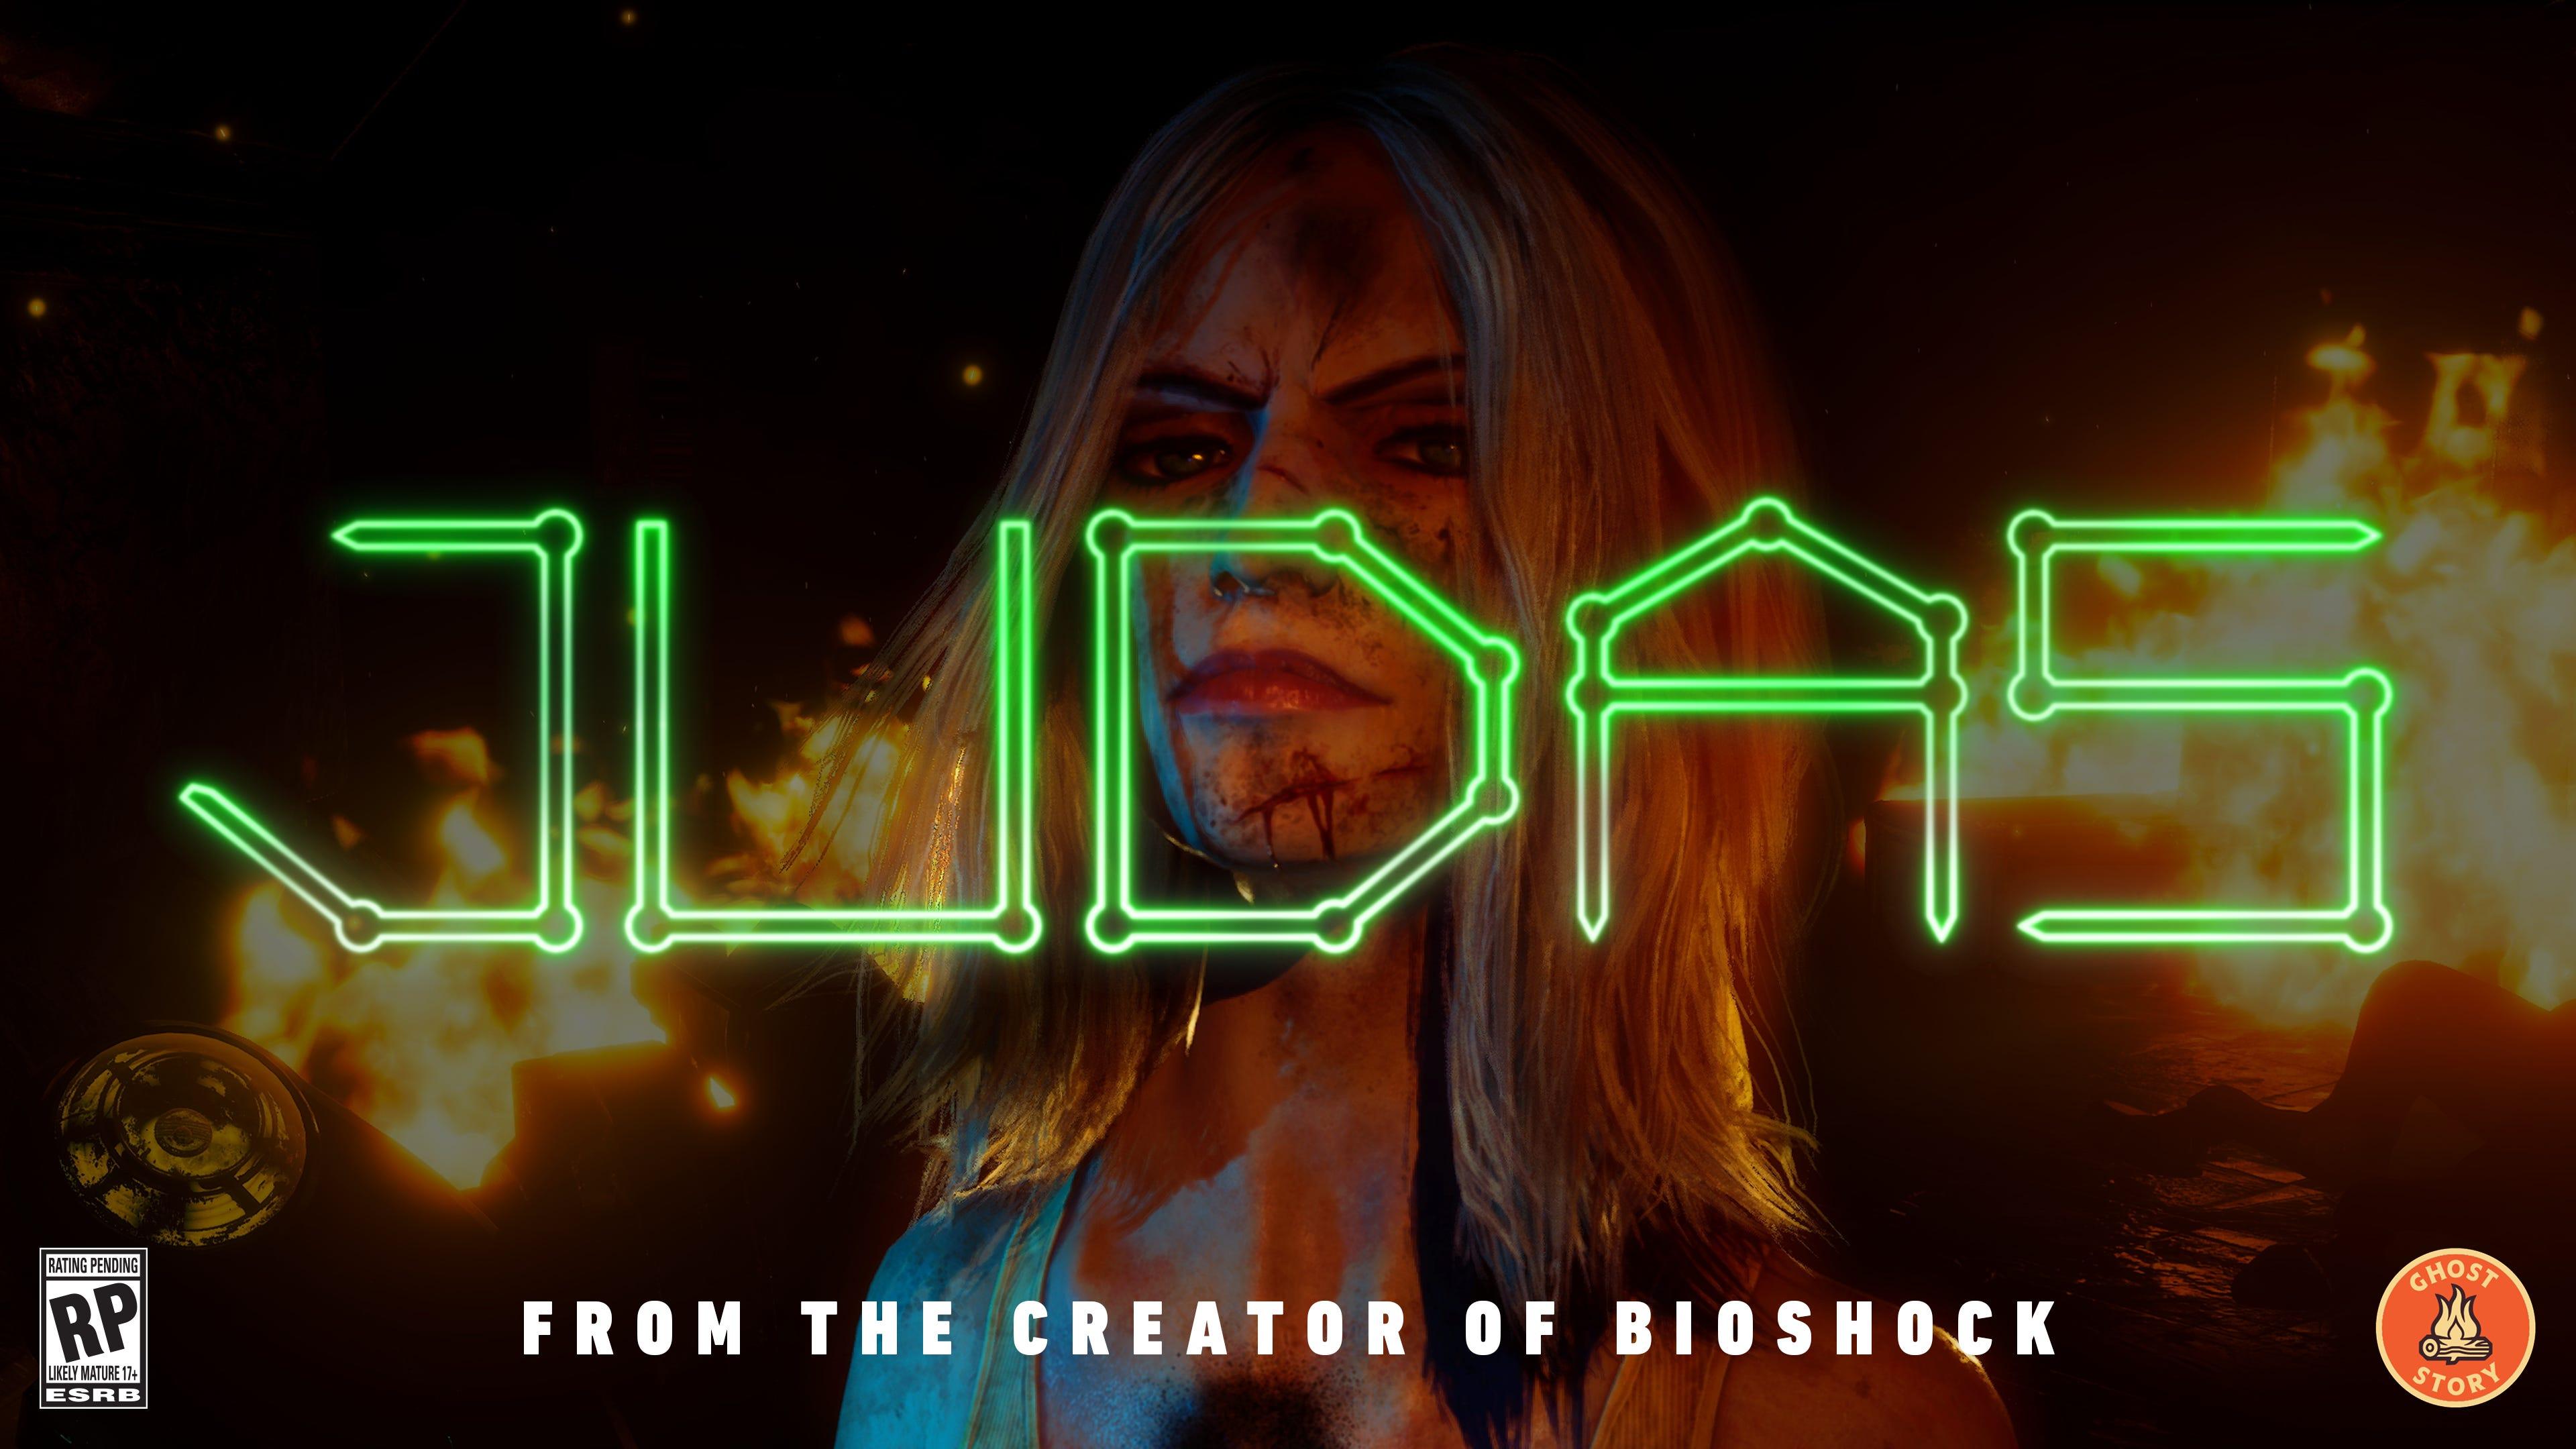 Ghost Story Games announced the title Judas at last year